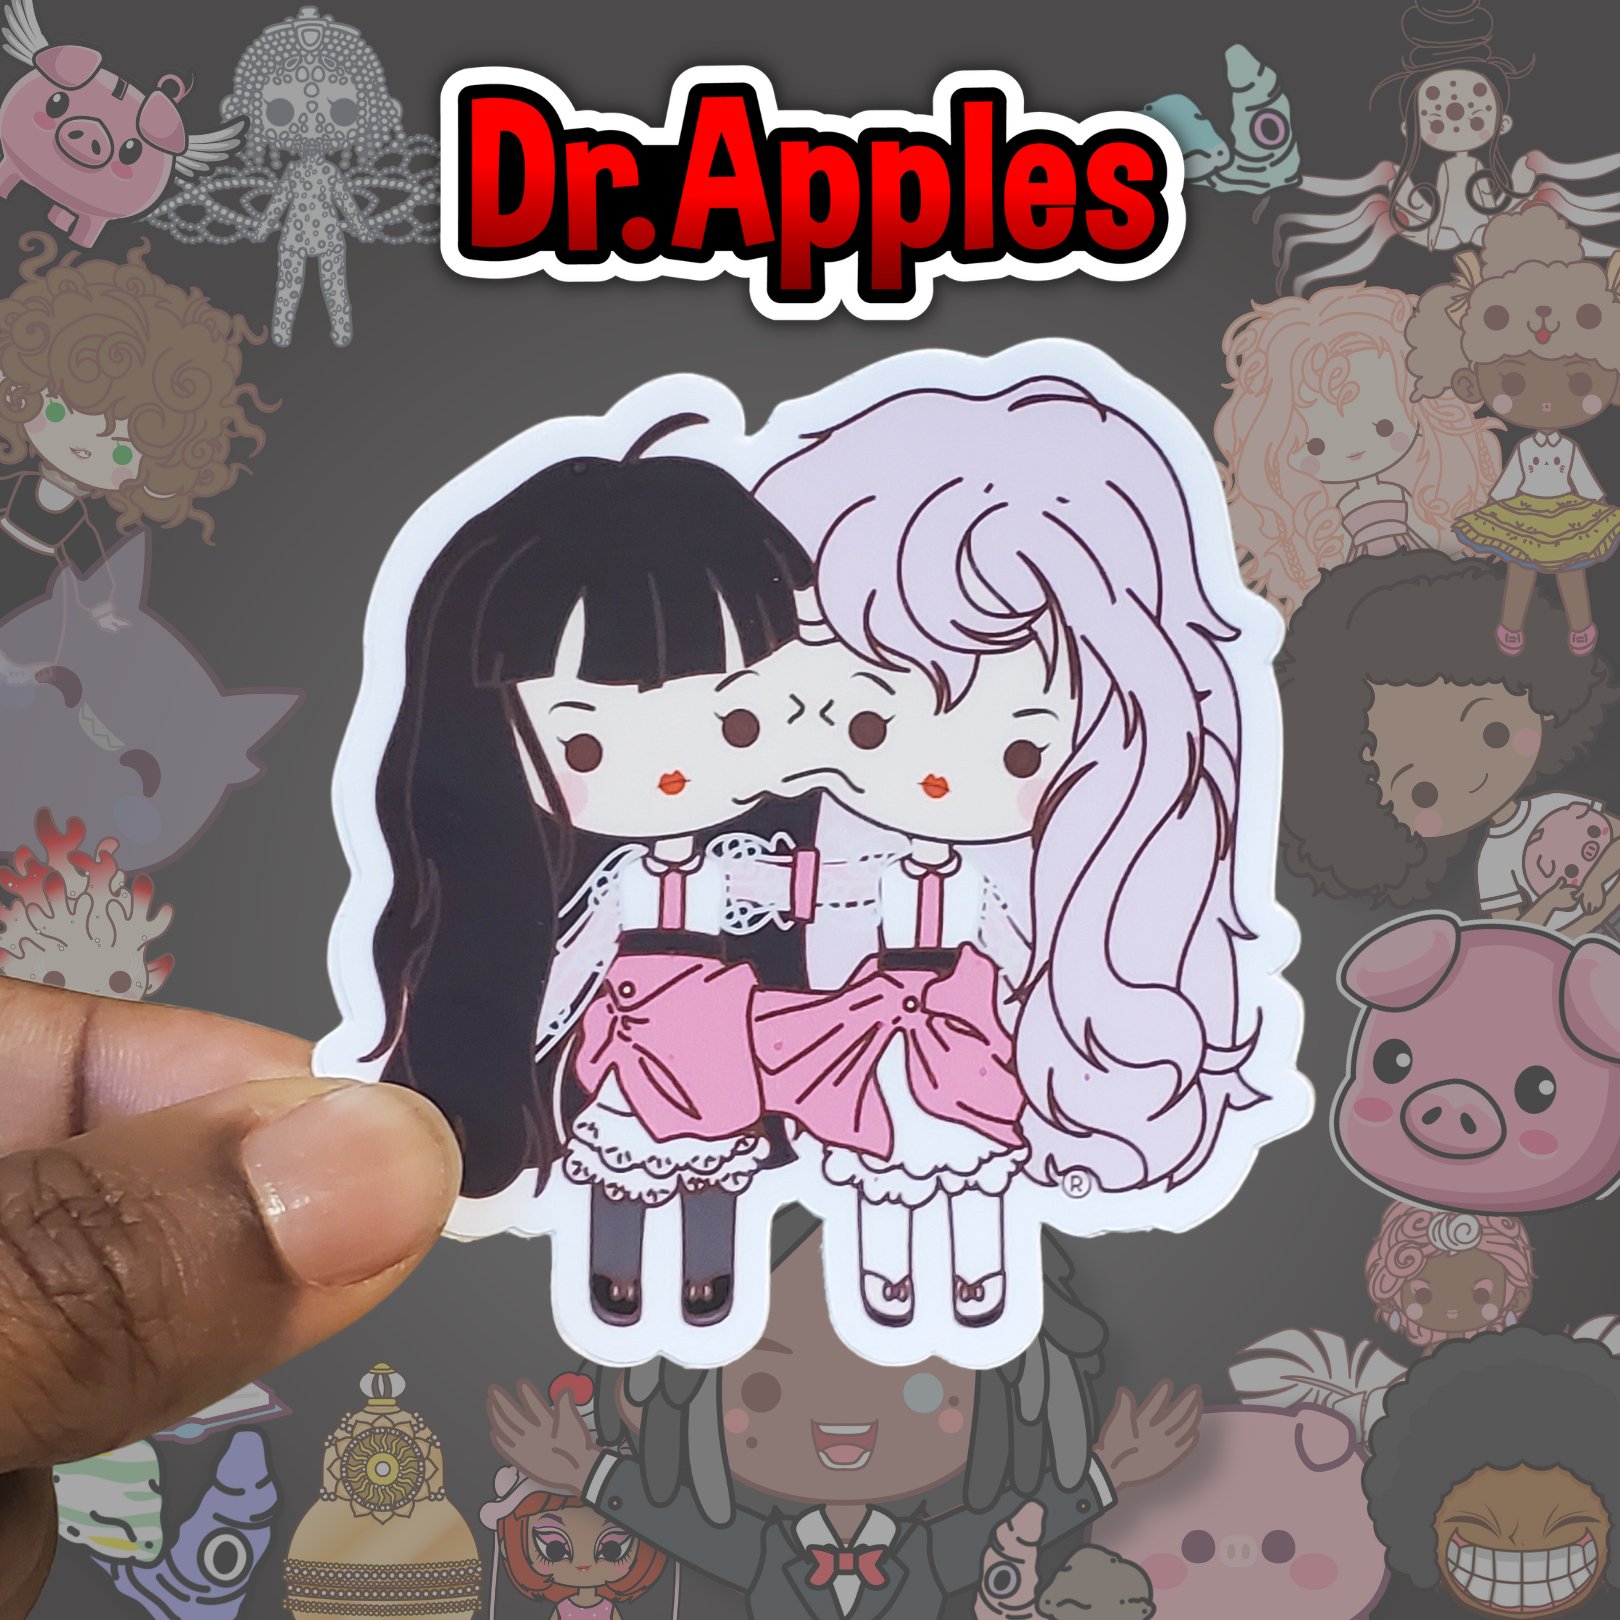 Dr Apples, Fictional Fantasy Folklore, Dr. Apples African American, animation, screenwriting, lacye, lacye a brown, fictional podcast, piggybanks,  african american business (5).jpg